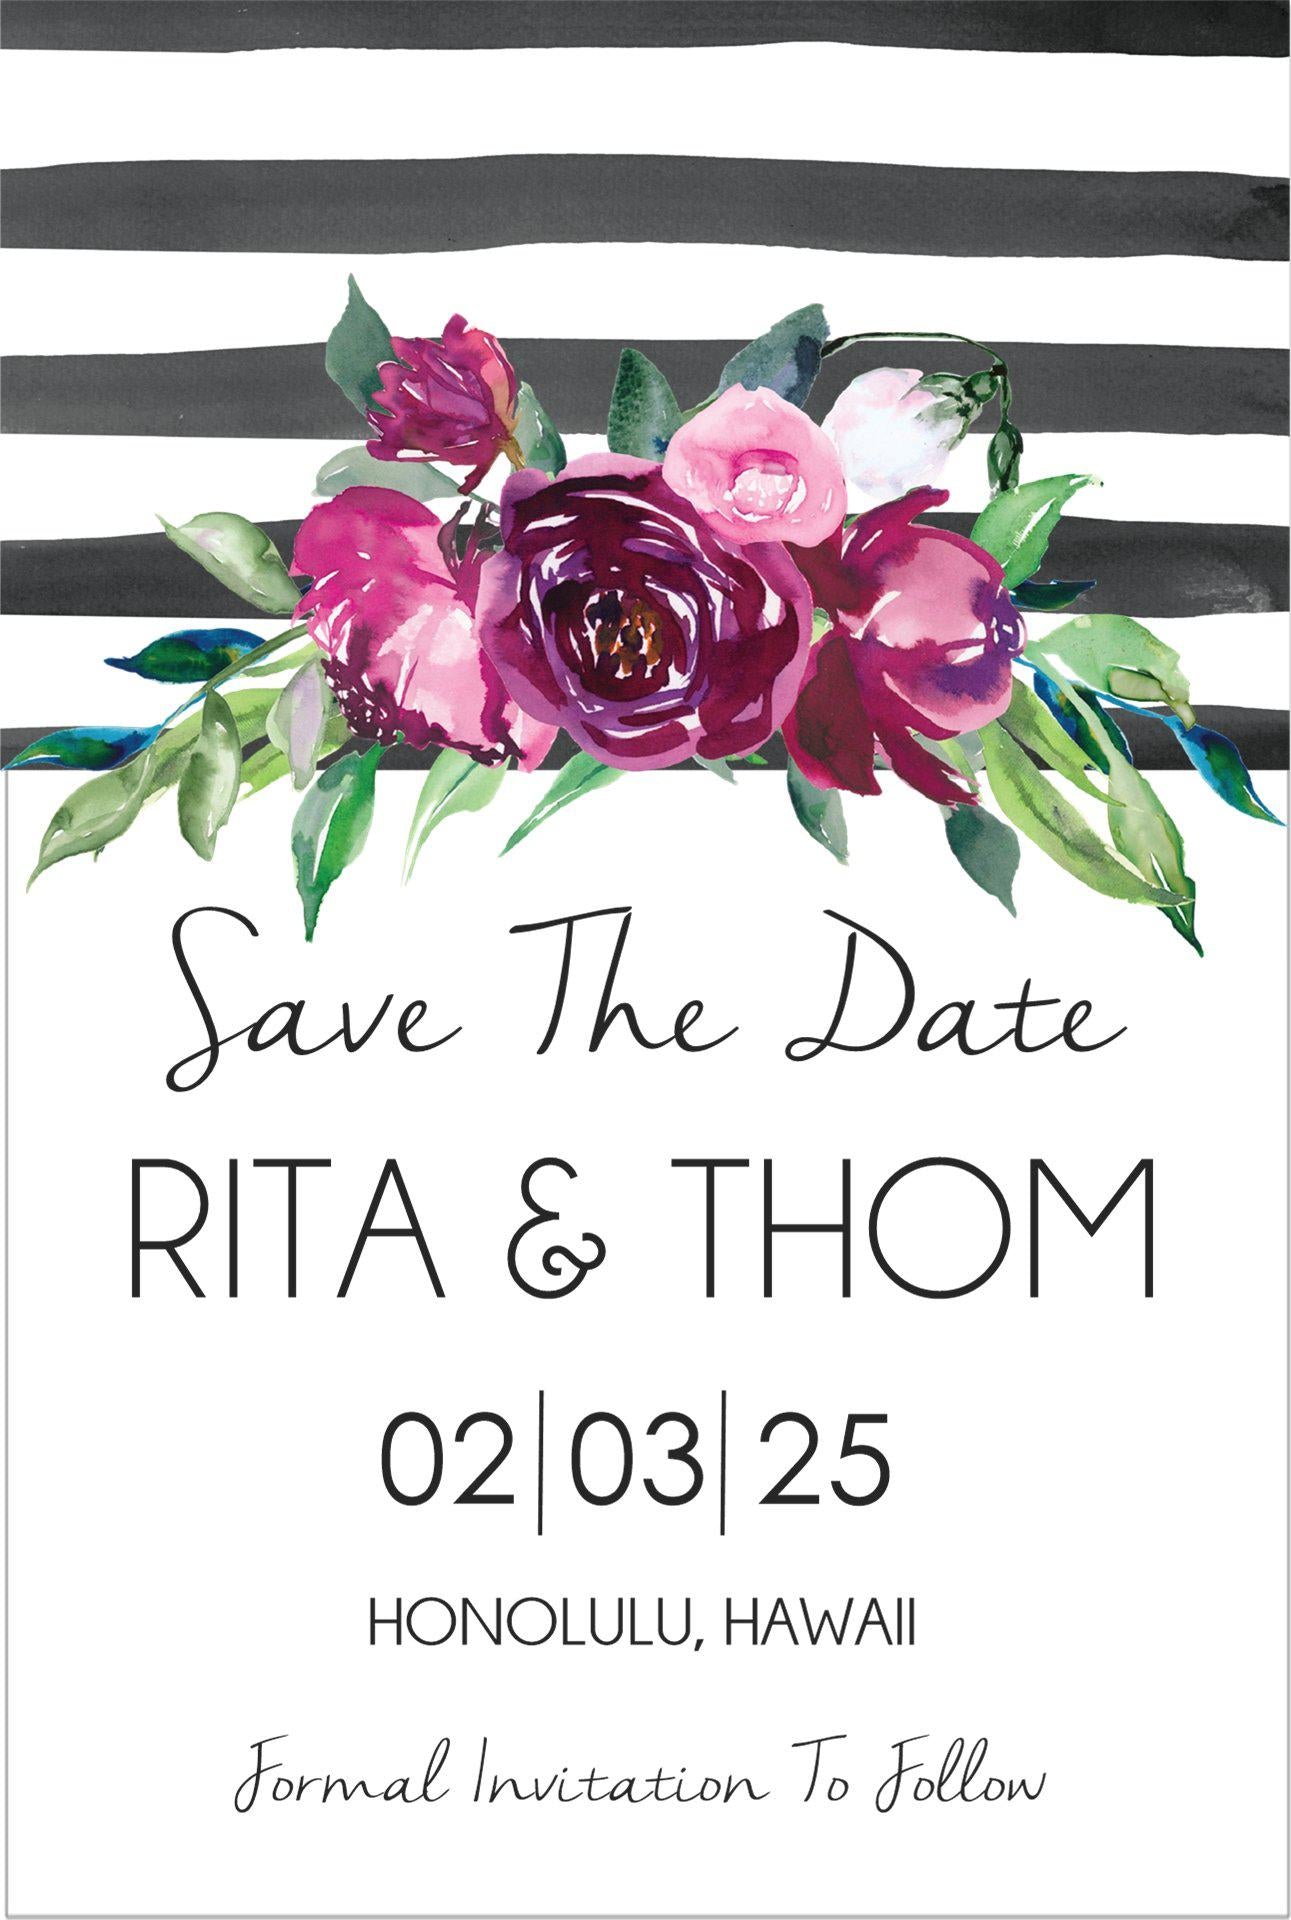 Black, White And Burgundy Wedding Save The Date Cards